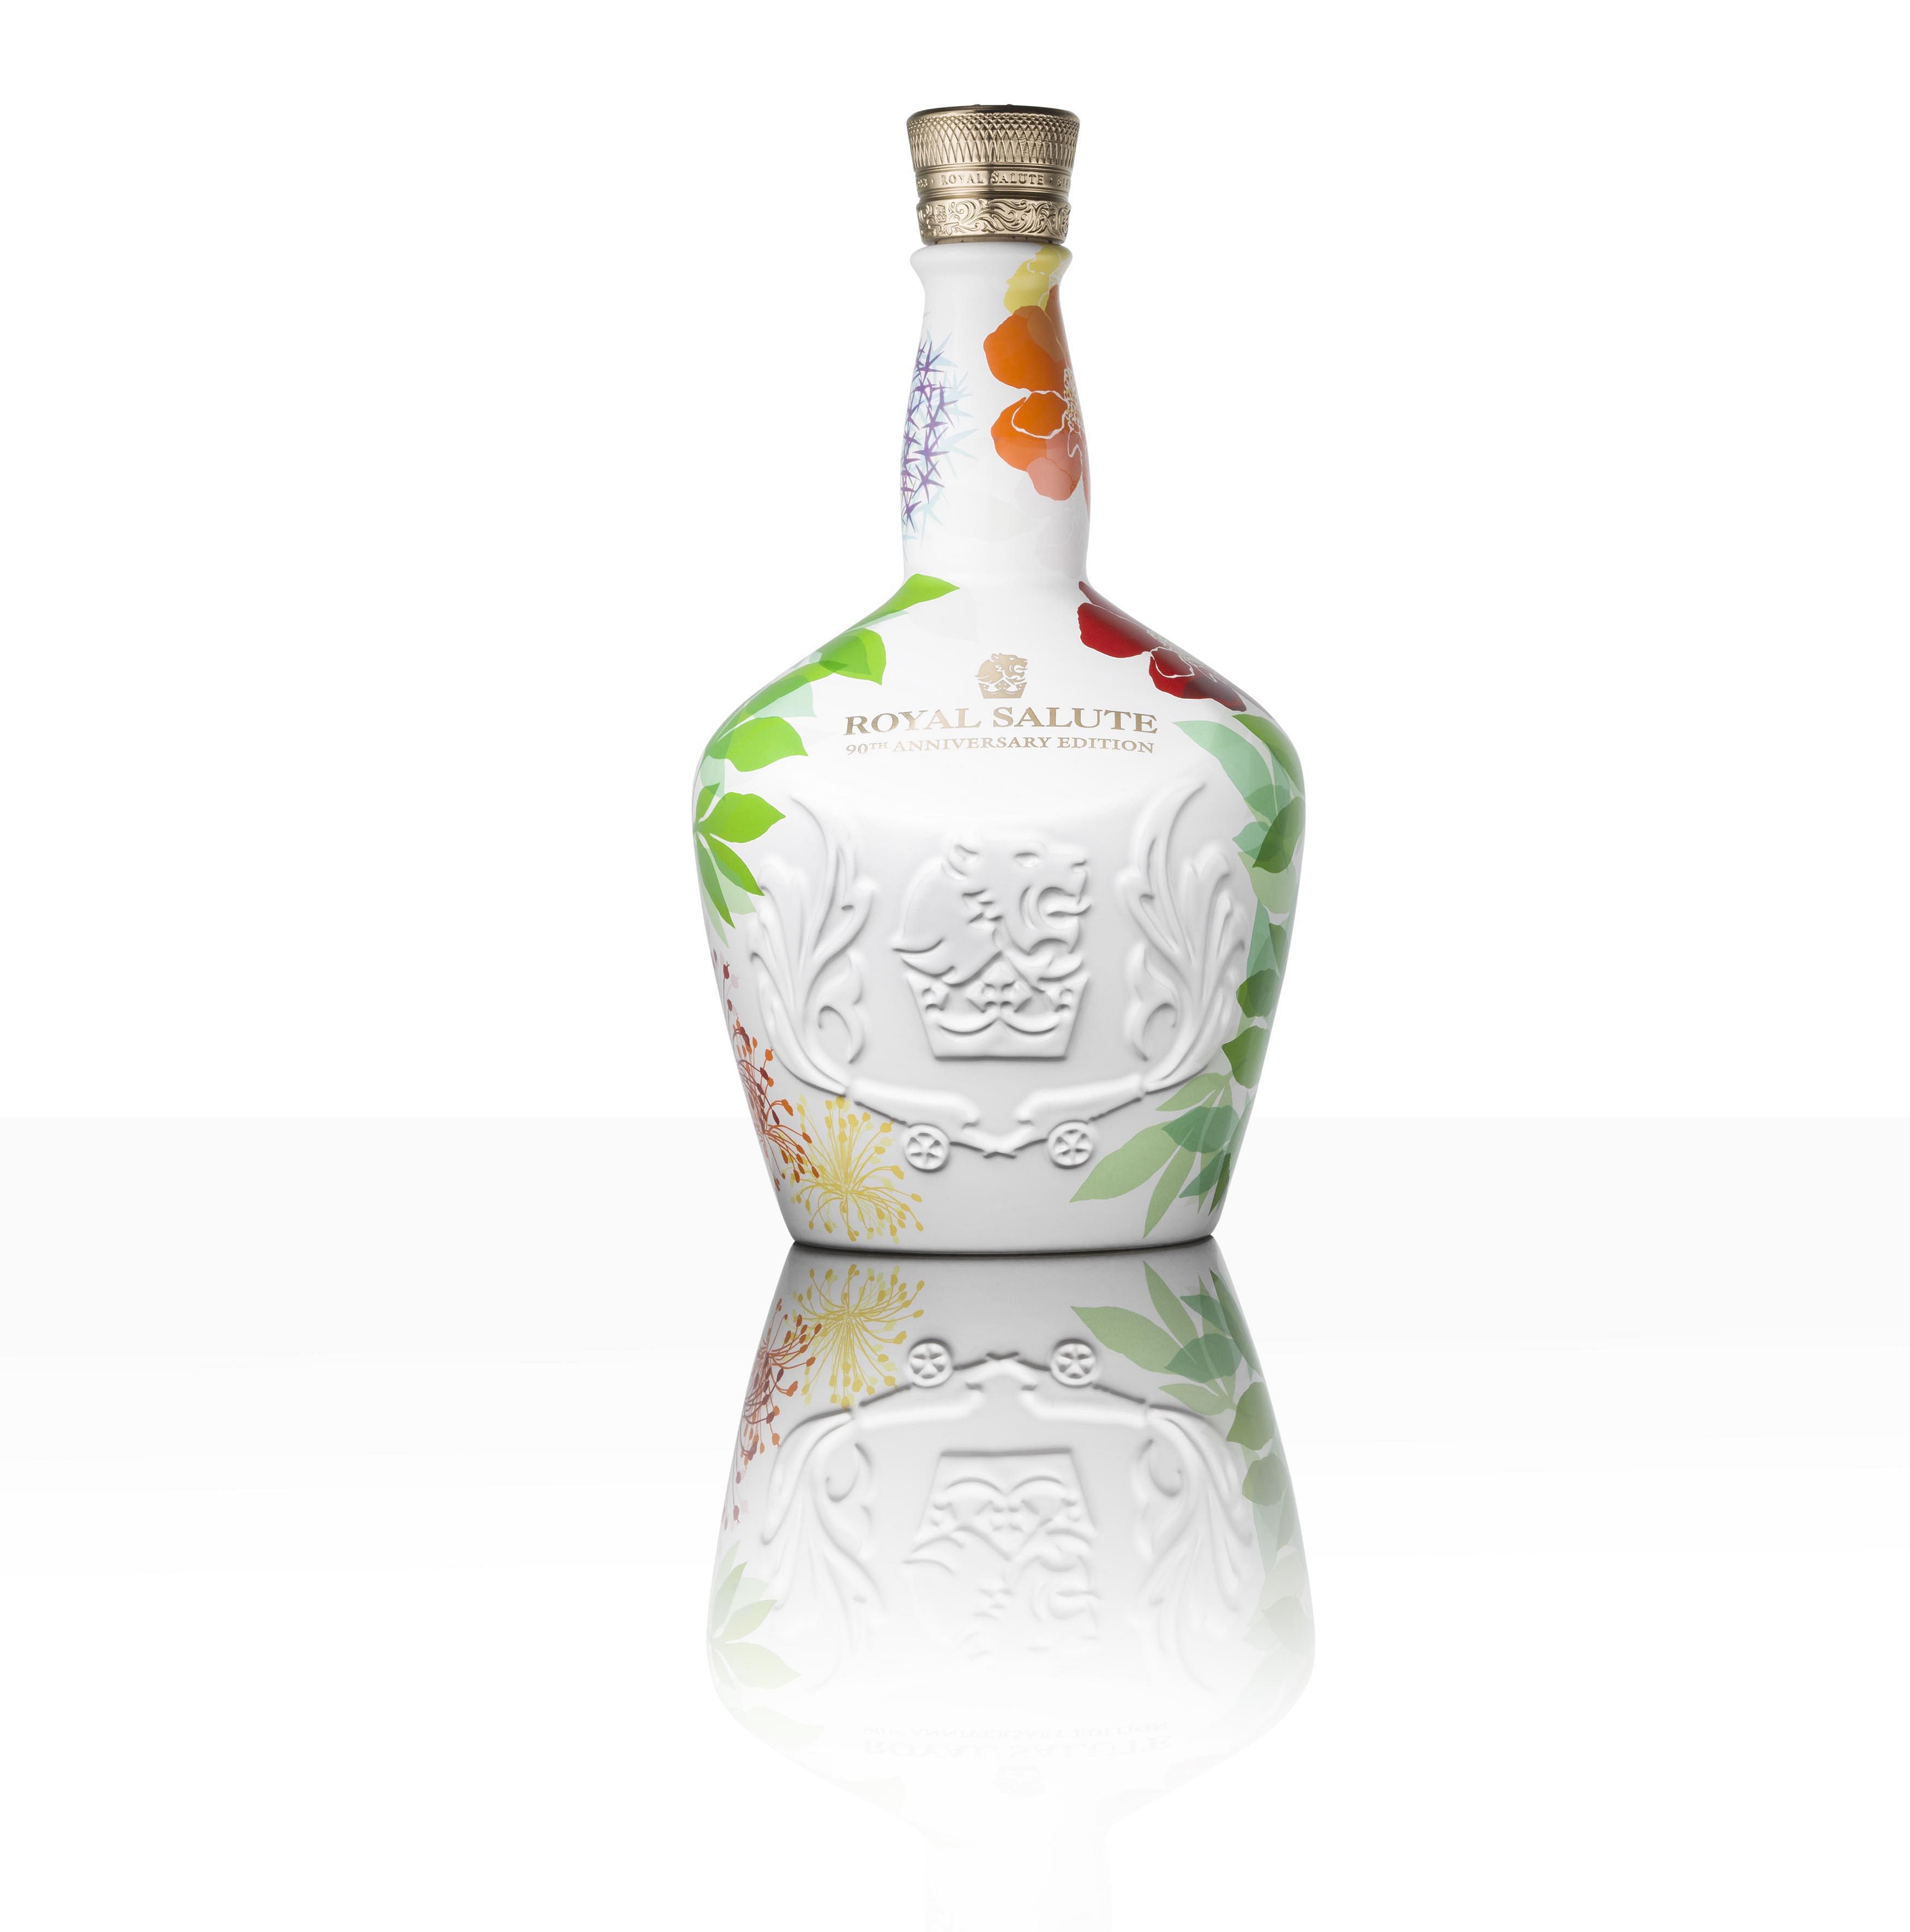 Royal salute 21-year-old Scotch whisky special edition honours 